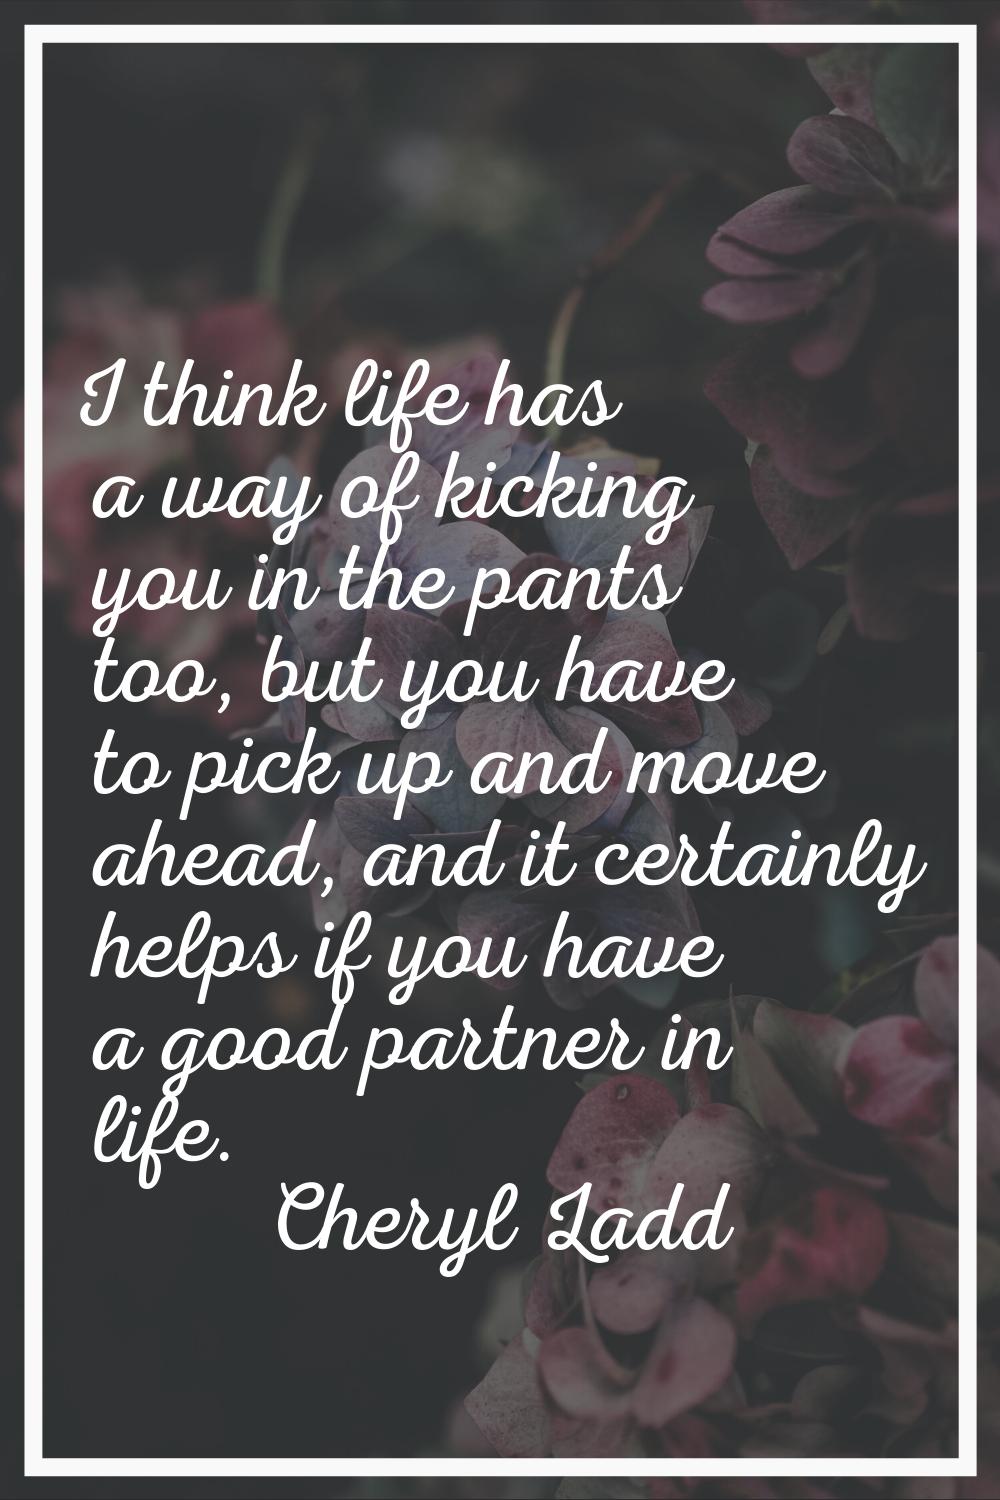 I think life has a way of kicking you in the pants too, but you have to pick up and move ahead, and